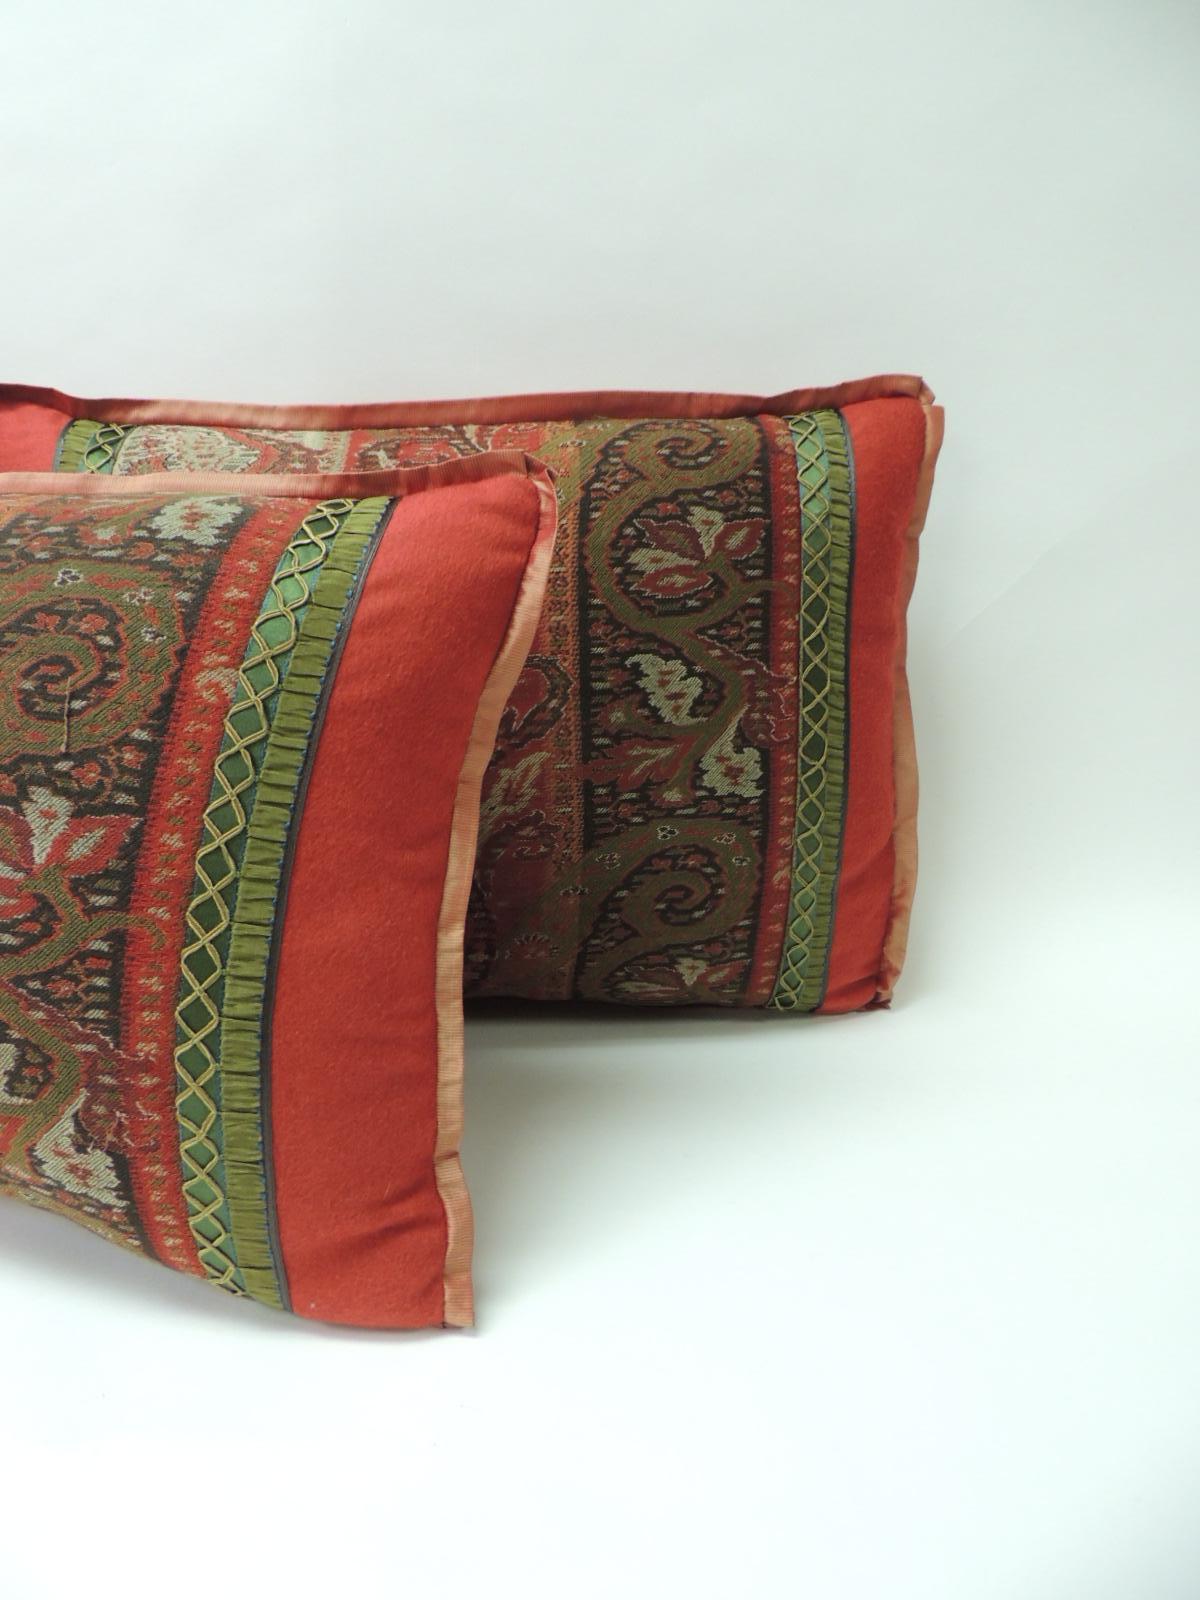 Hand-Crafted Antique Red and Black Kashmir Paisley Lumbar Decorative Pillow